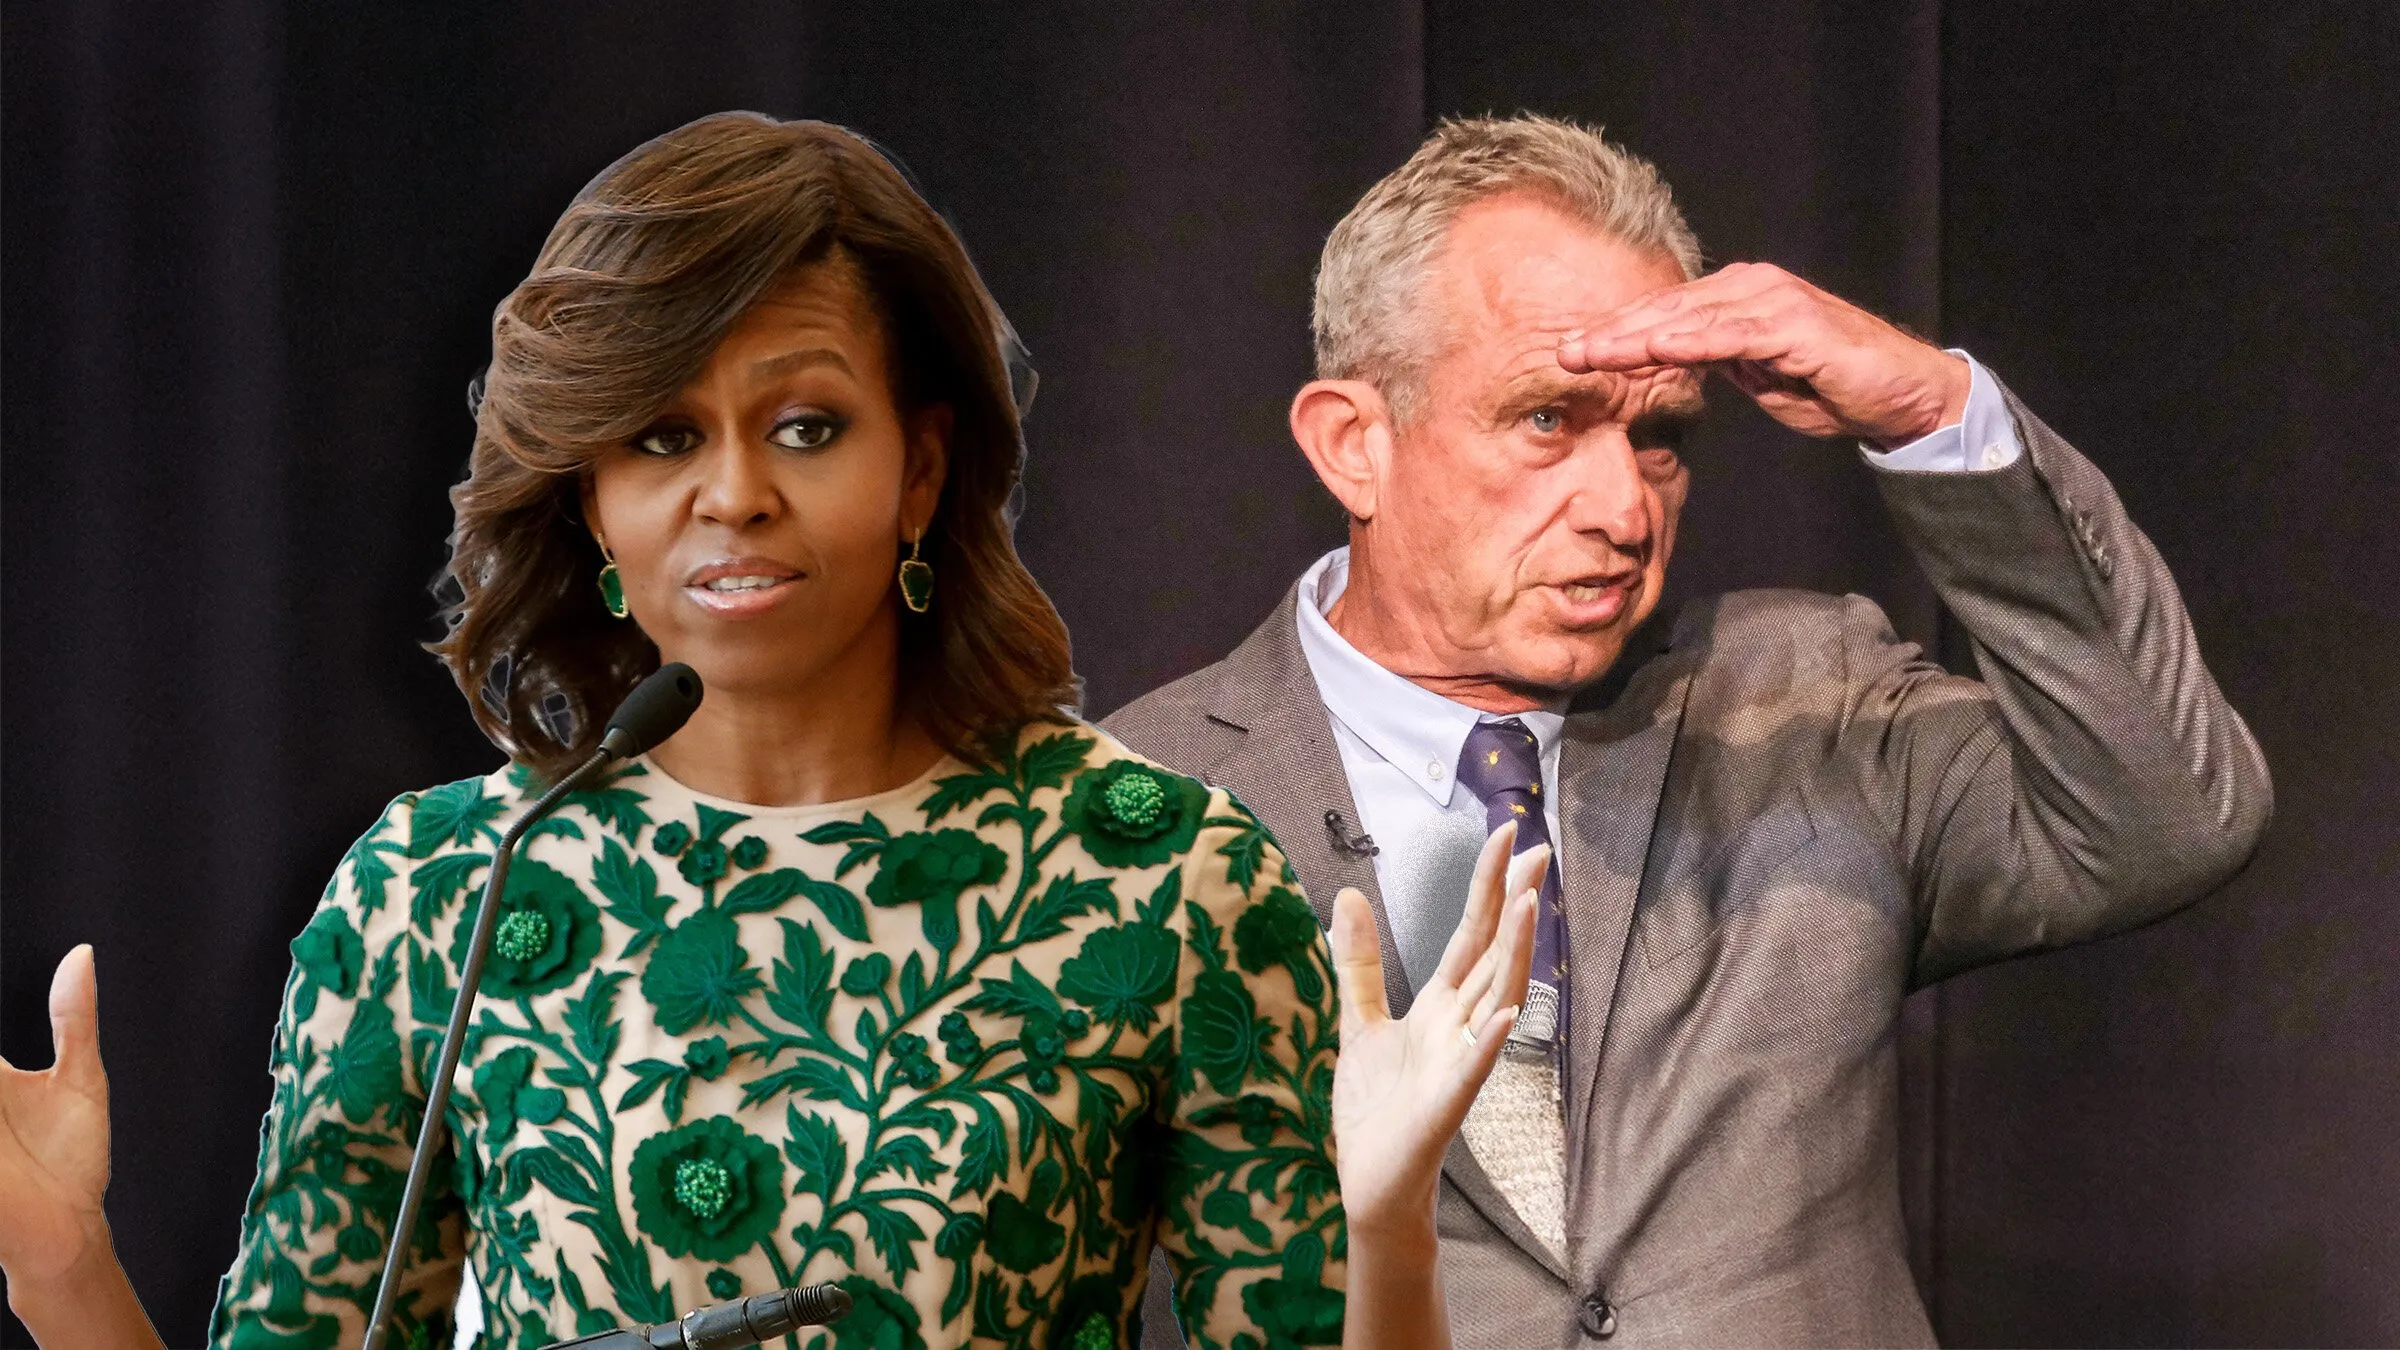 Photo illustration of Michelle Obama and Robert F. Kennedy, Jr. Images: Debby Wong and Ringo Chiu/Shutterstock